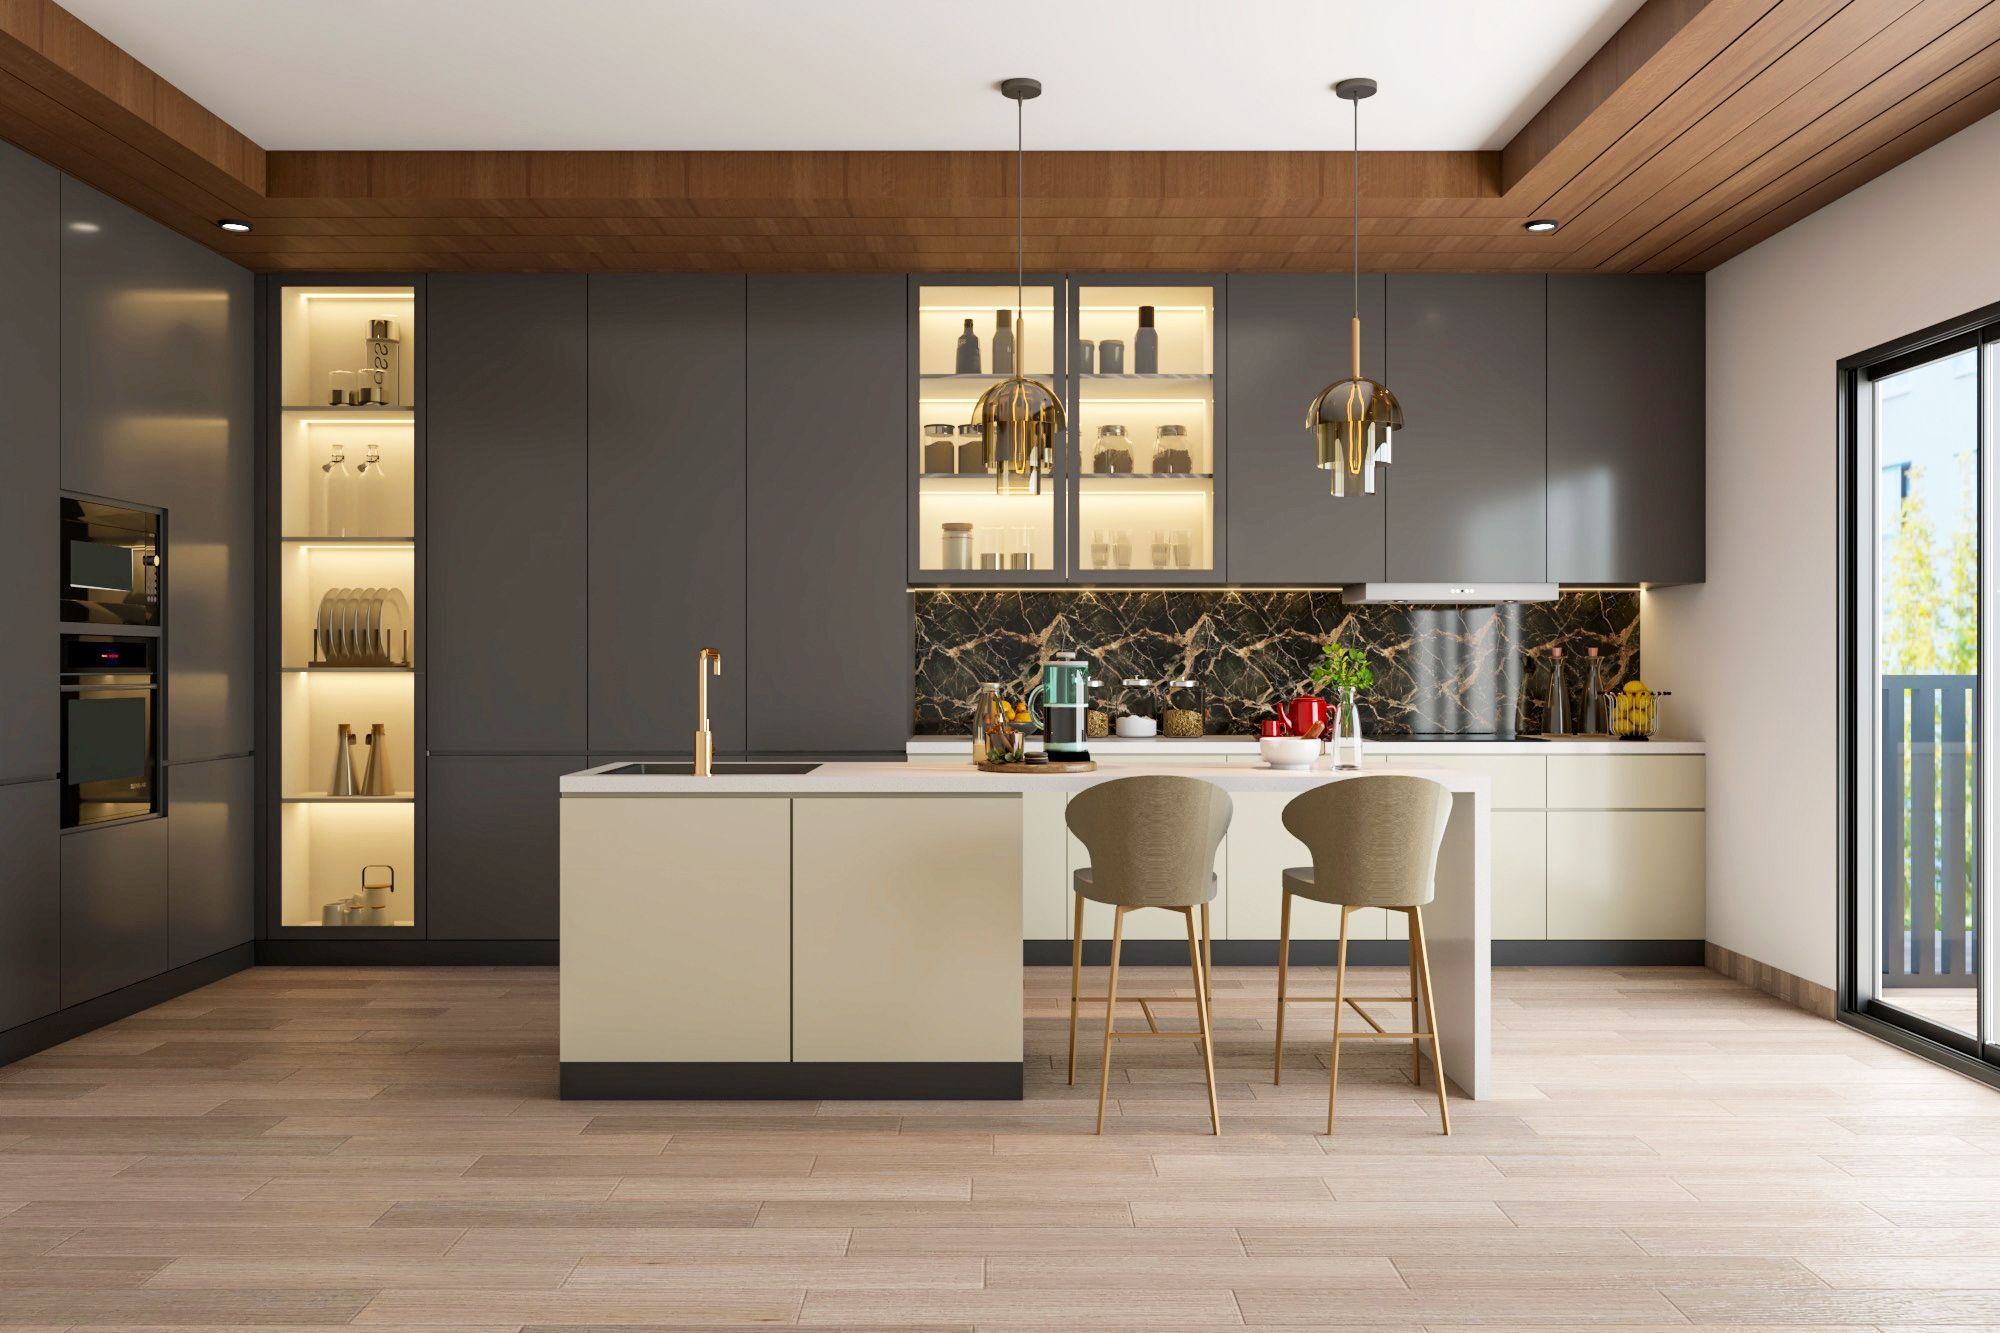 Contemporary Modular Island Kitchen Cabinet Design With Dark Grey And Off-White Cabinets